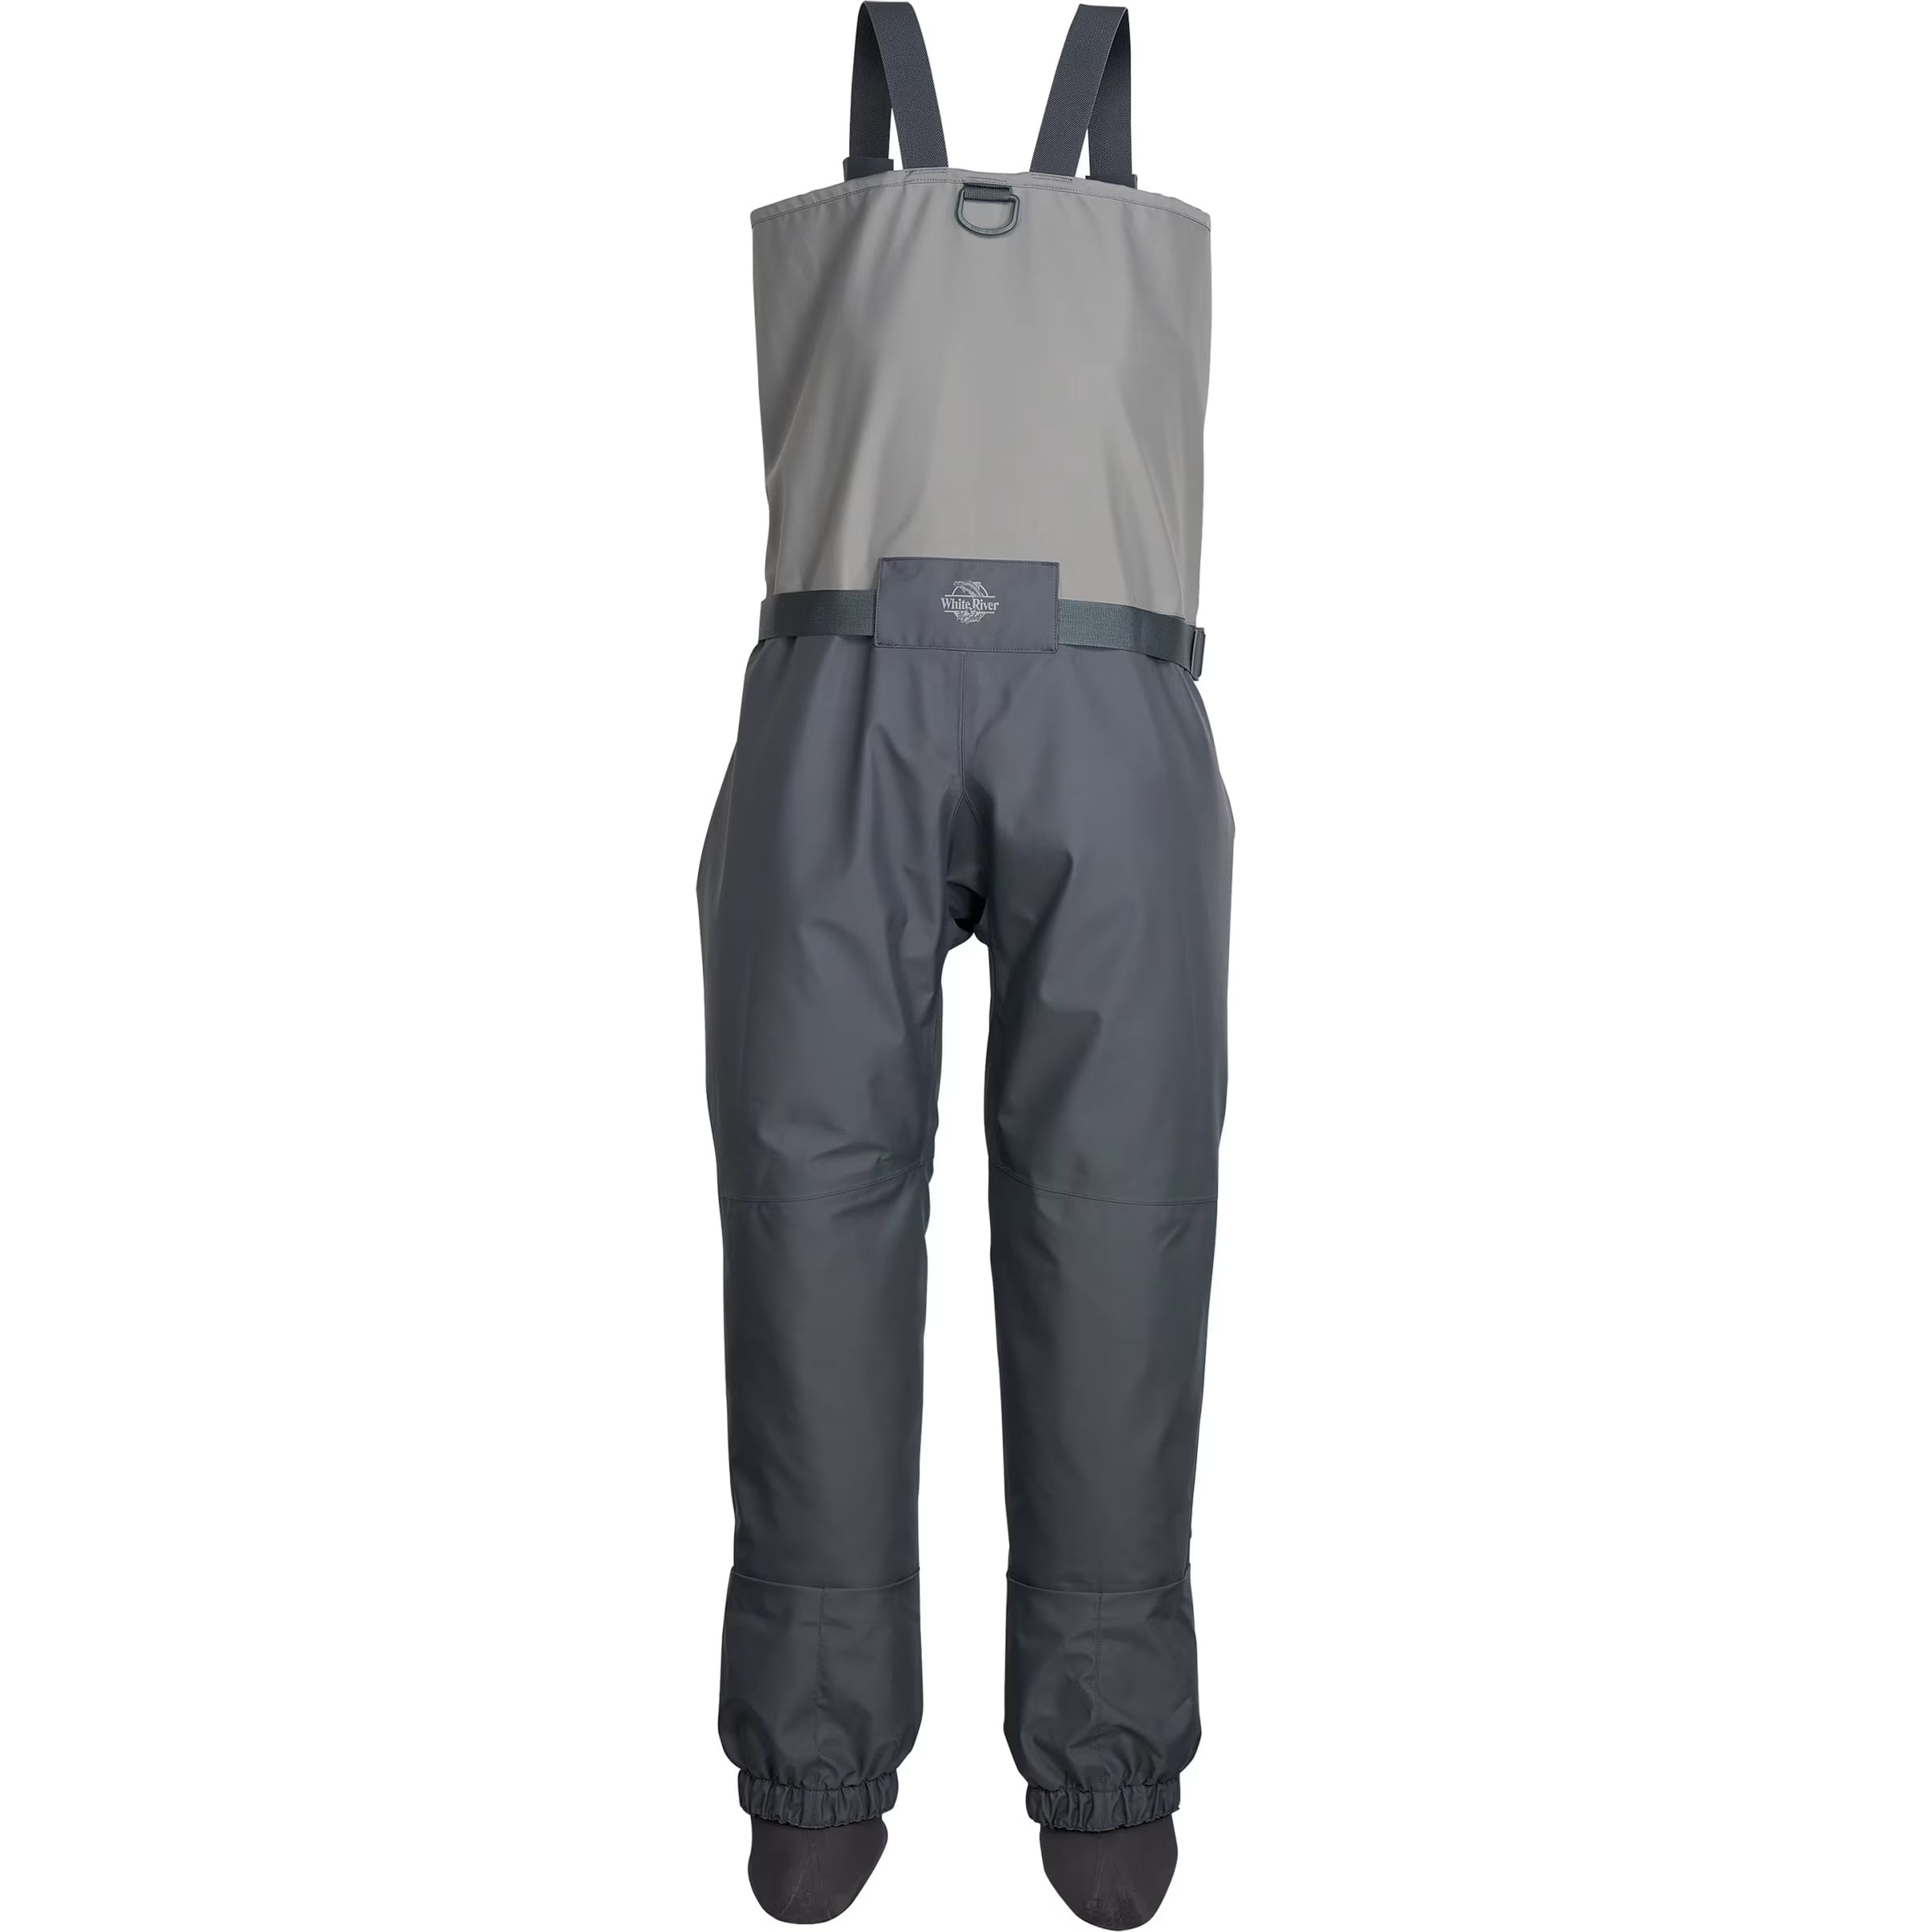 White River Fly Shop® Men’s Prestige Front Zip Stocking-Foot Chest Waders